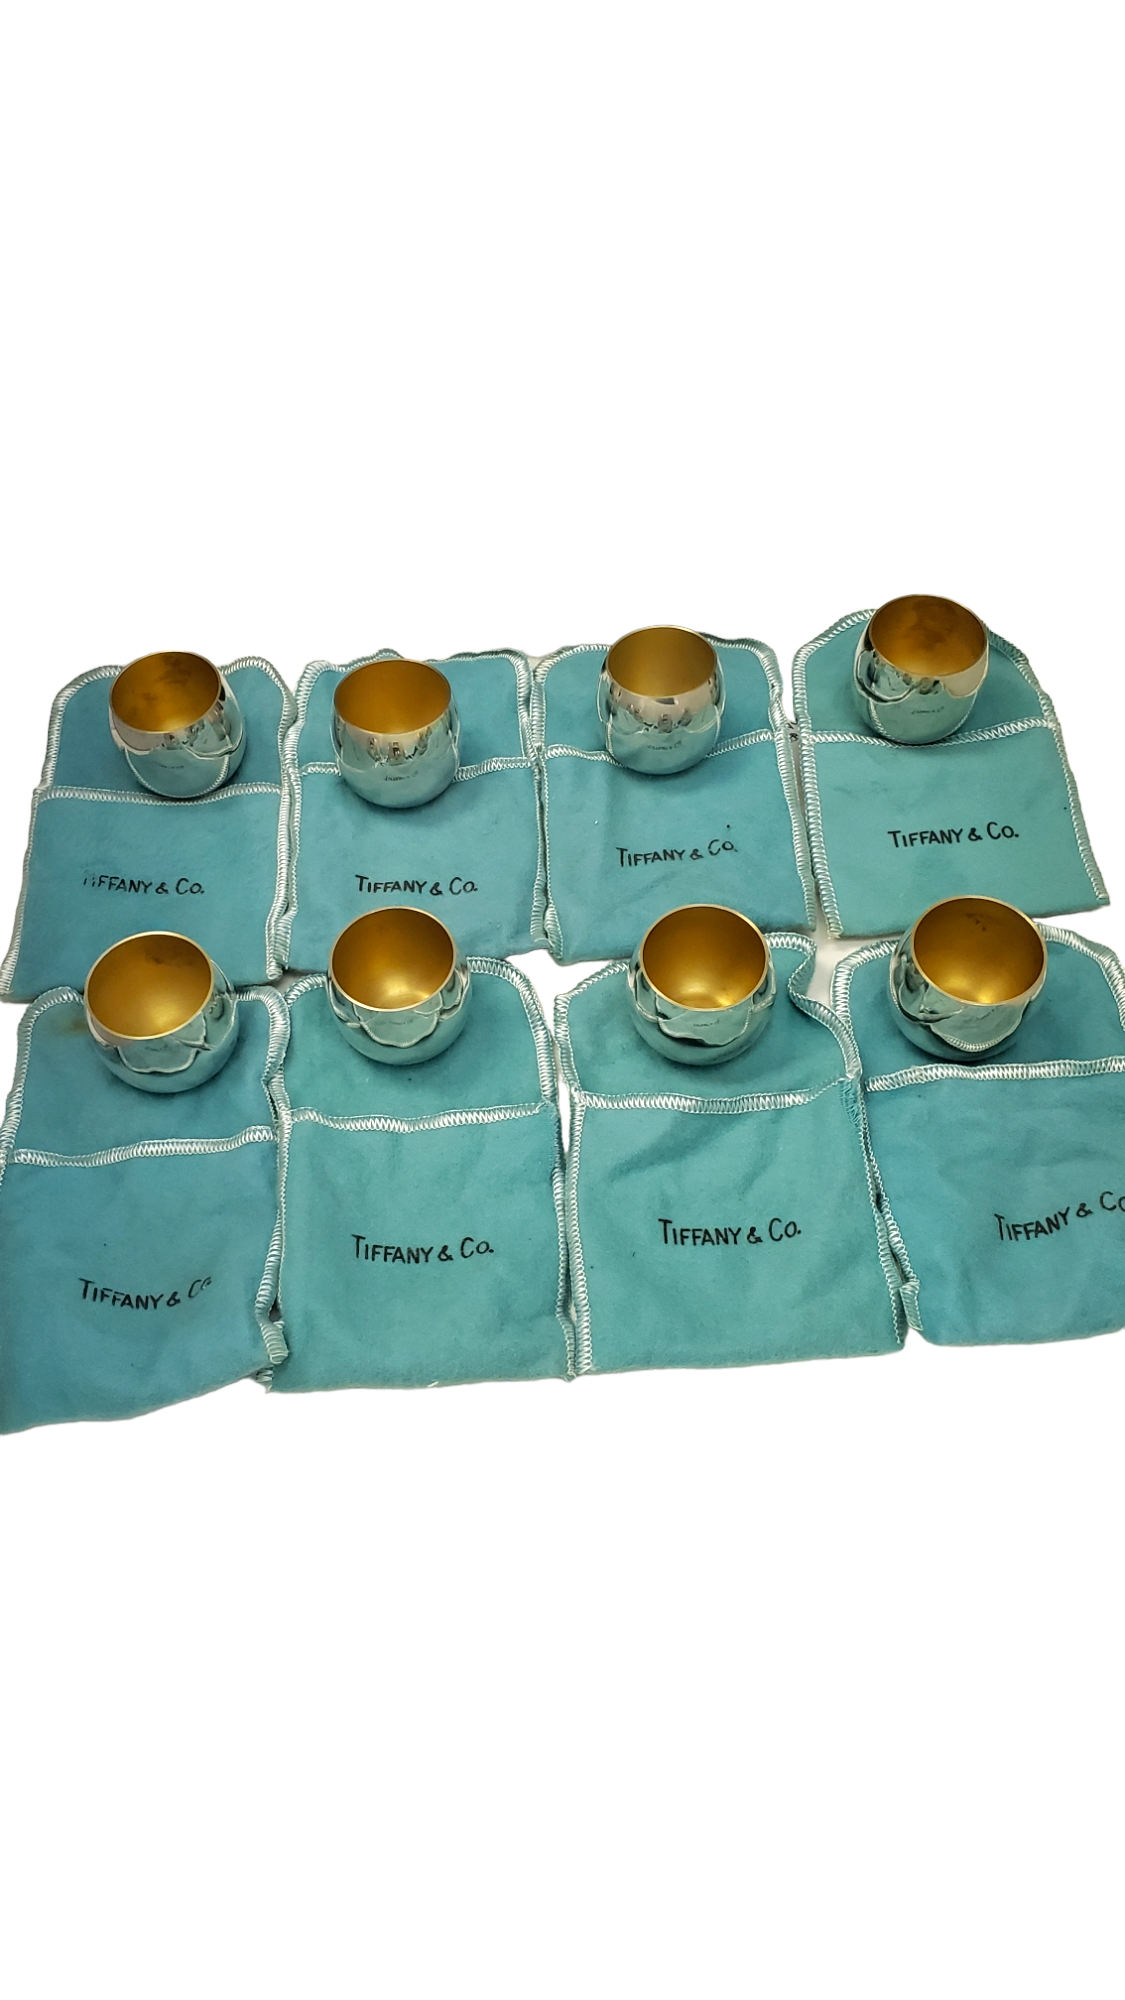 Tiffany & Co Sterling Silver Makers Shot Cups Set of 8